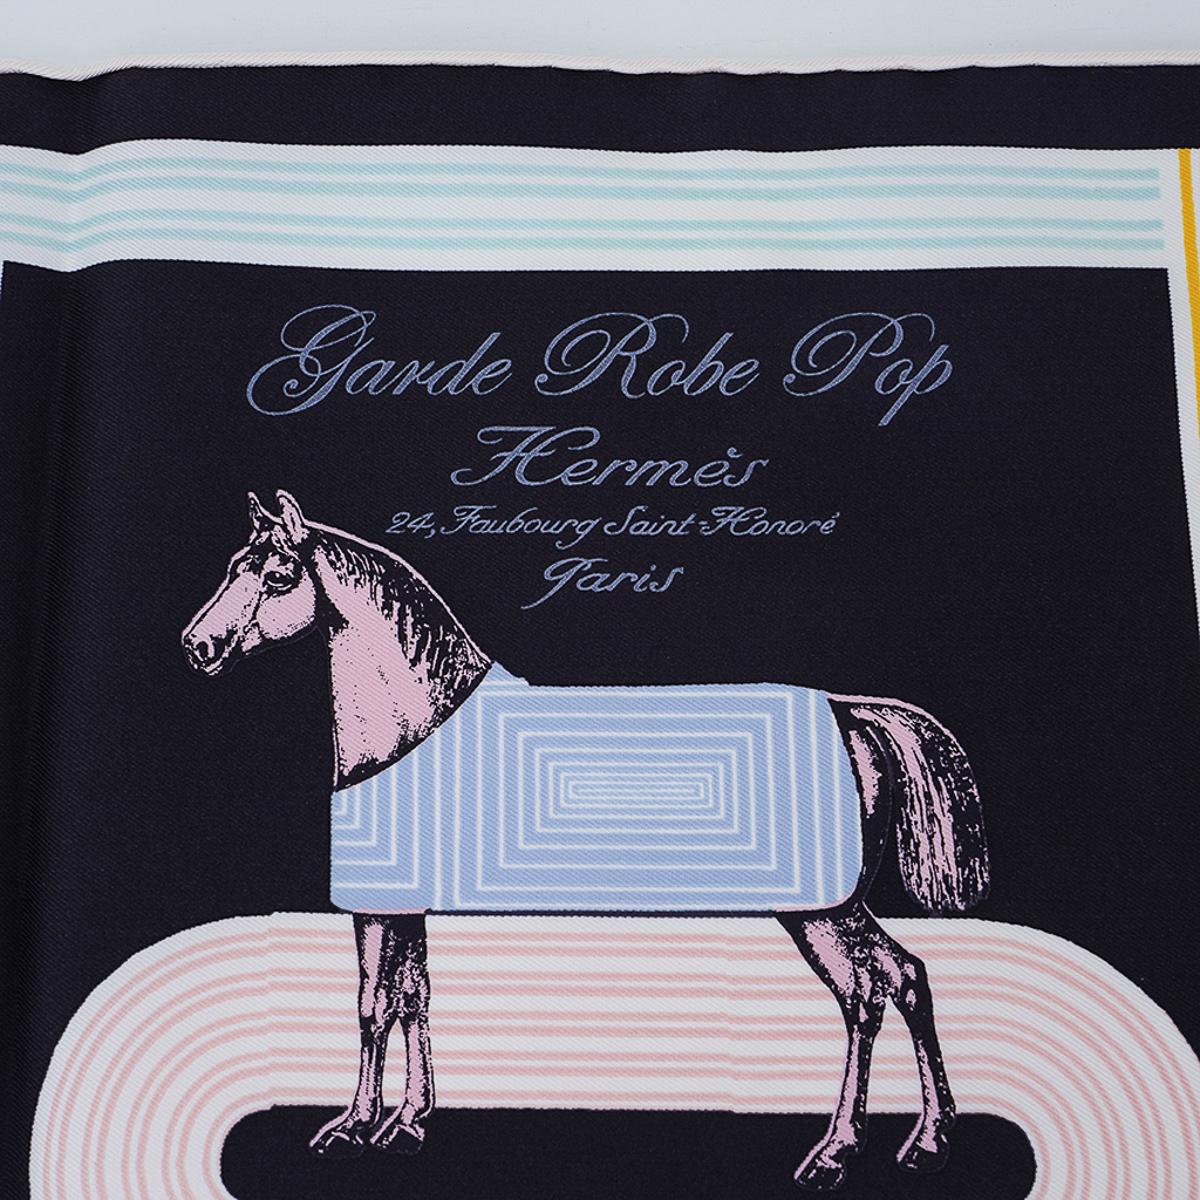 Mightychic offers an Hermes Garde Robe Pop scarf featured in Noir and Rose colorway.
Designed by Gianpaolo Pagni, this pocket square depicts a modern take on horse blankets.
This beautiful scarf can accent your wardrobe and bags in a myriad